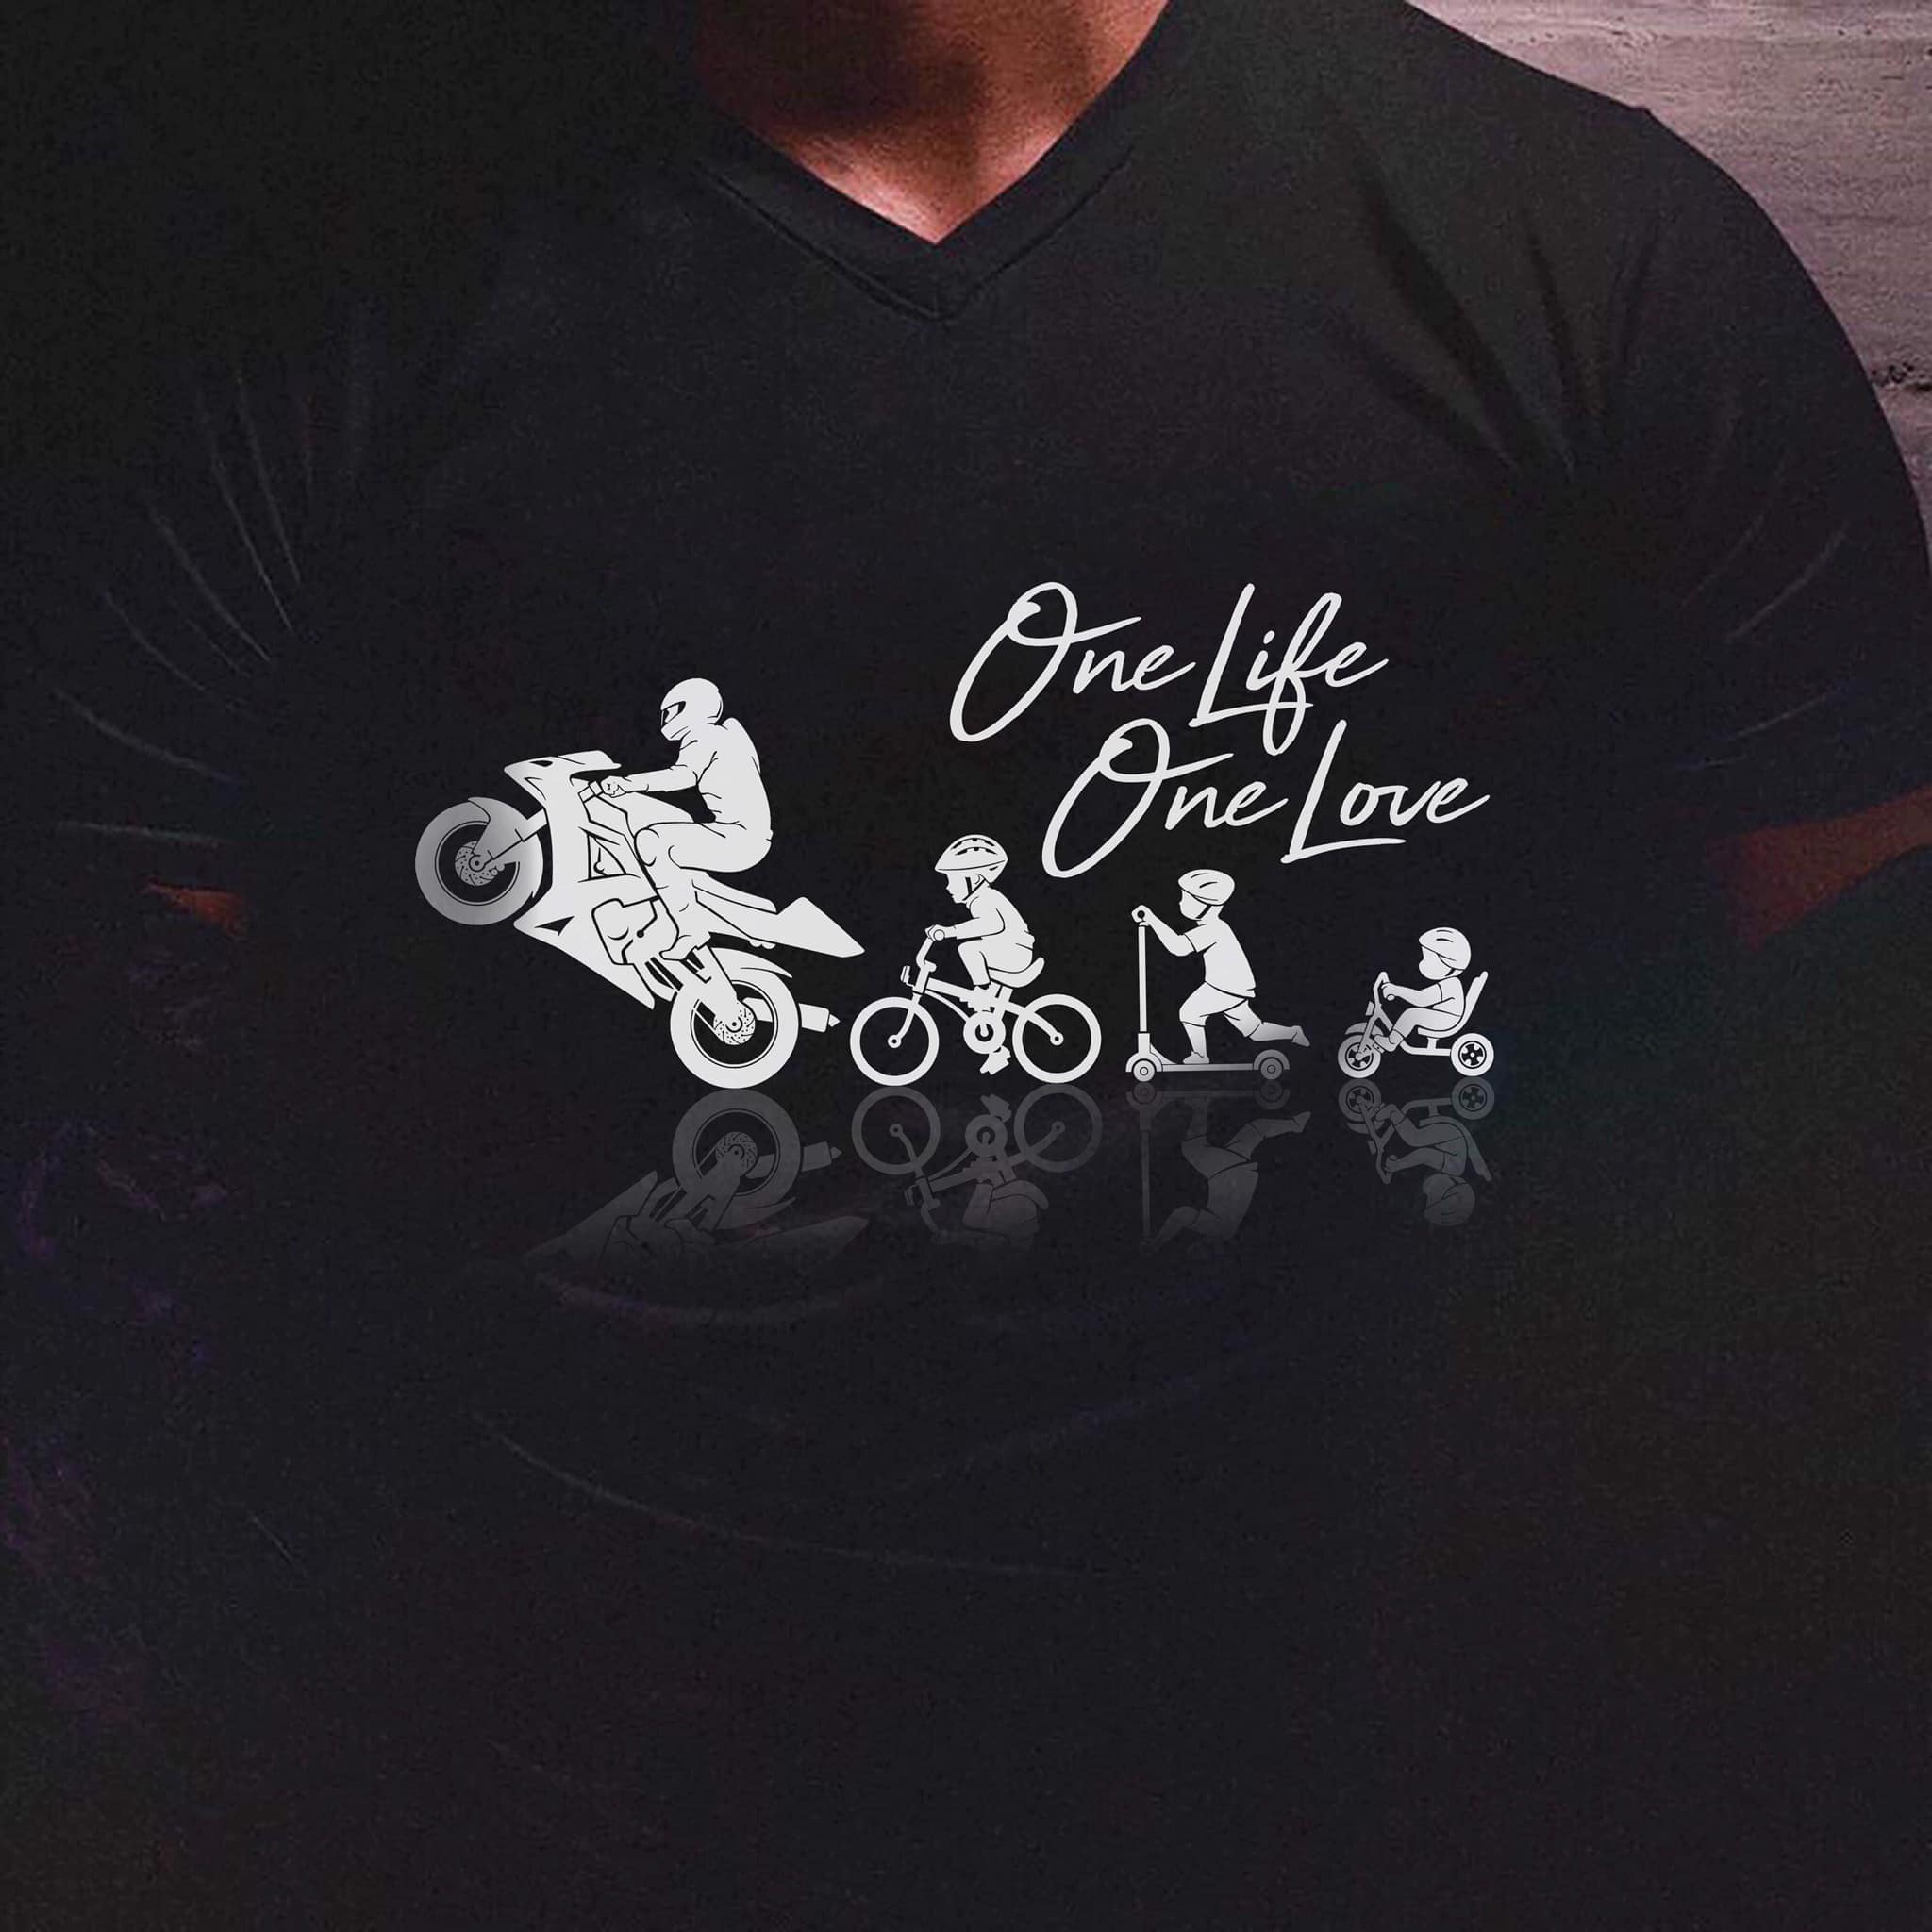 One life on love - Love riding motorcycle, motorcycle lover